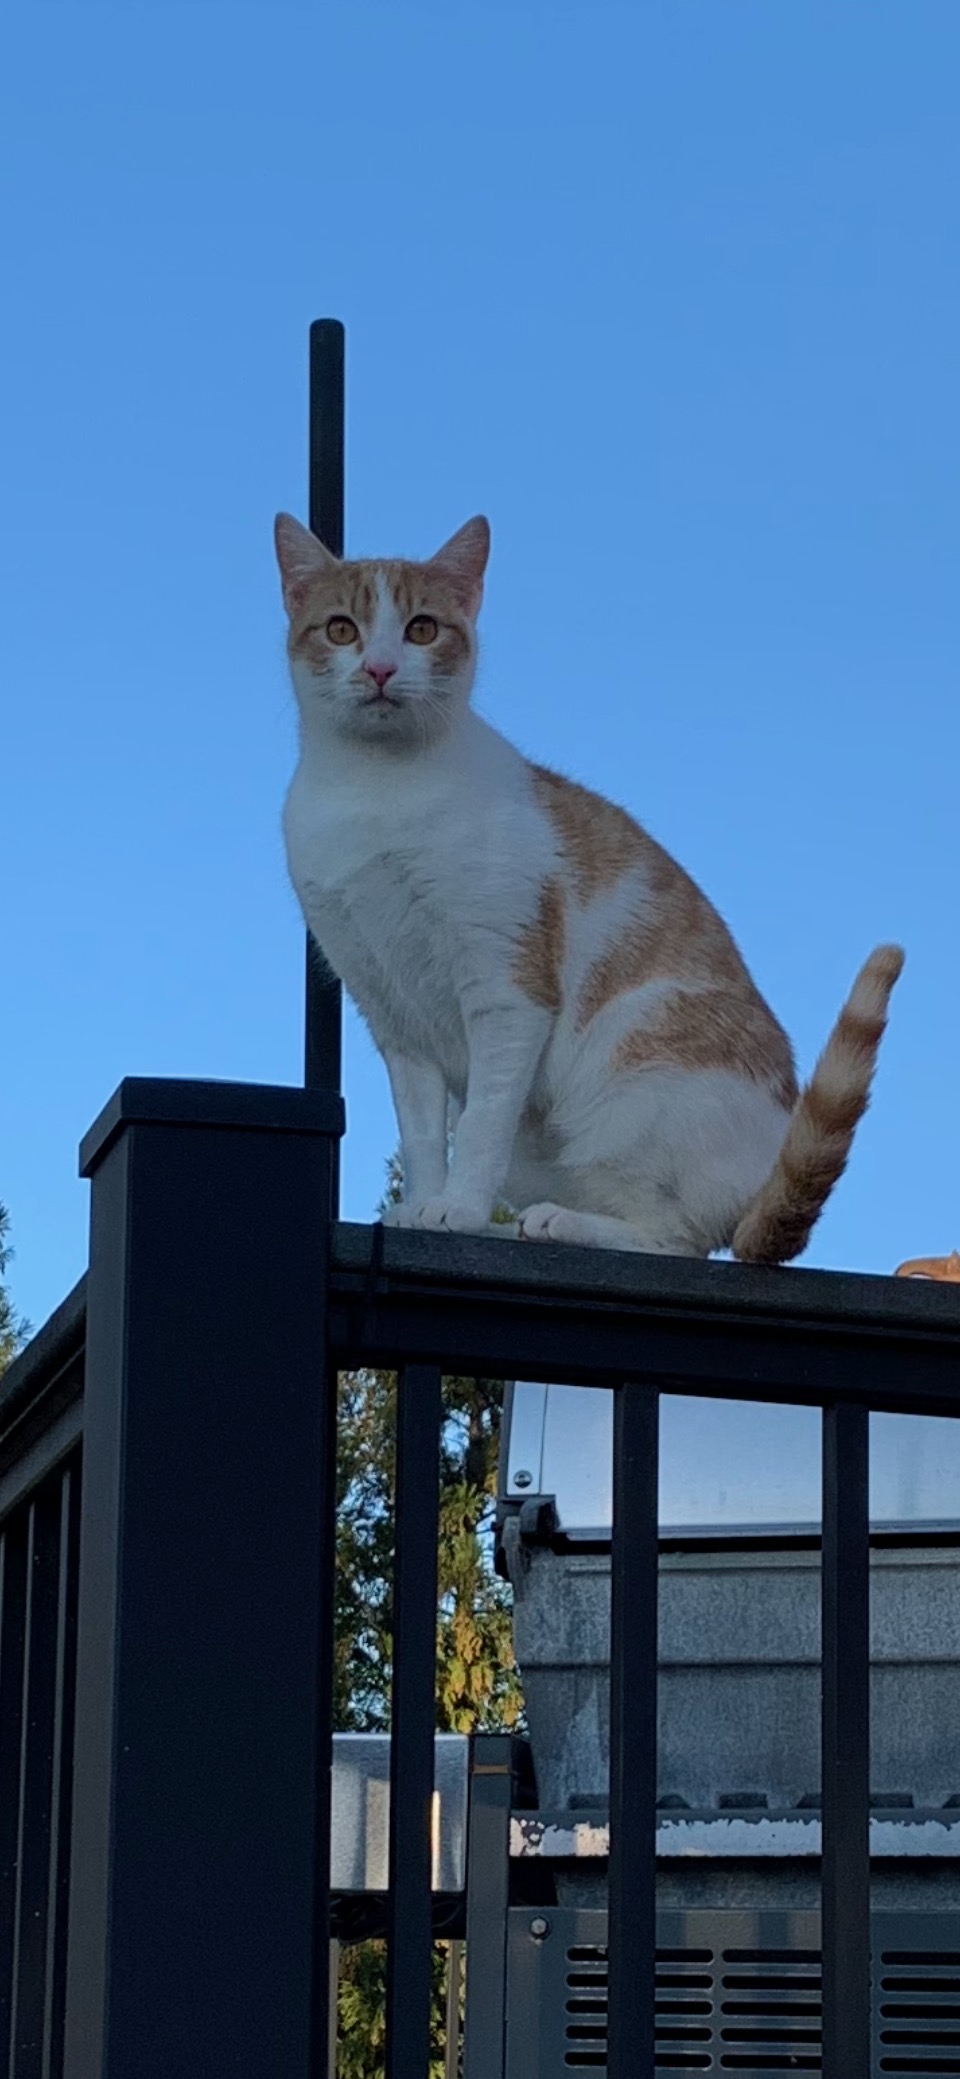 Image of Sally, Lost Cat